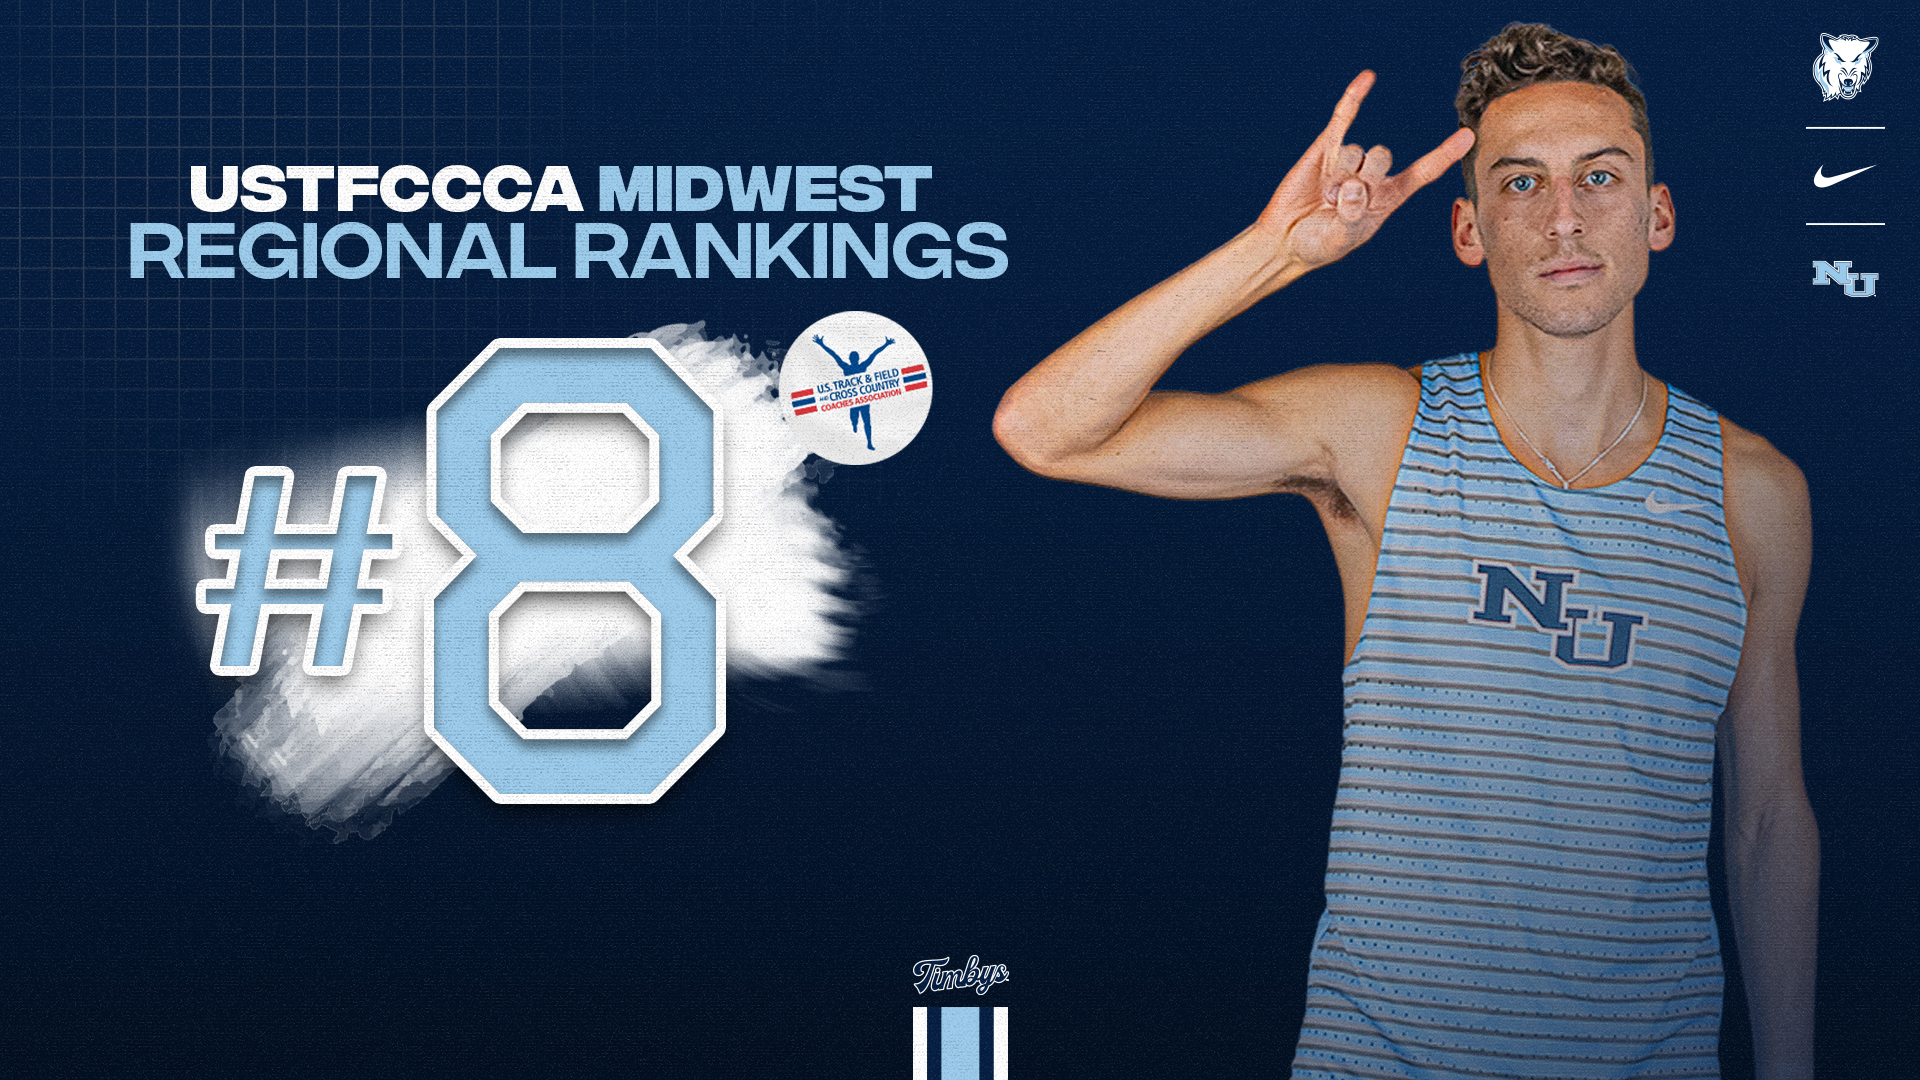 Men's Cross Country Moves Up To No. 8 In Midwest Regional Rankings Following Conference Championships